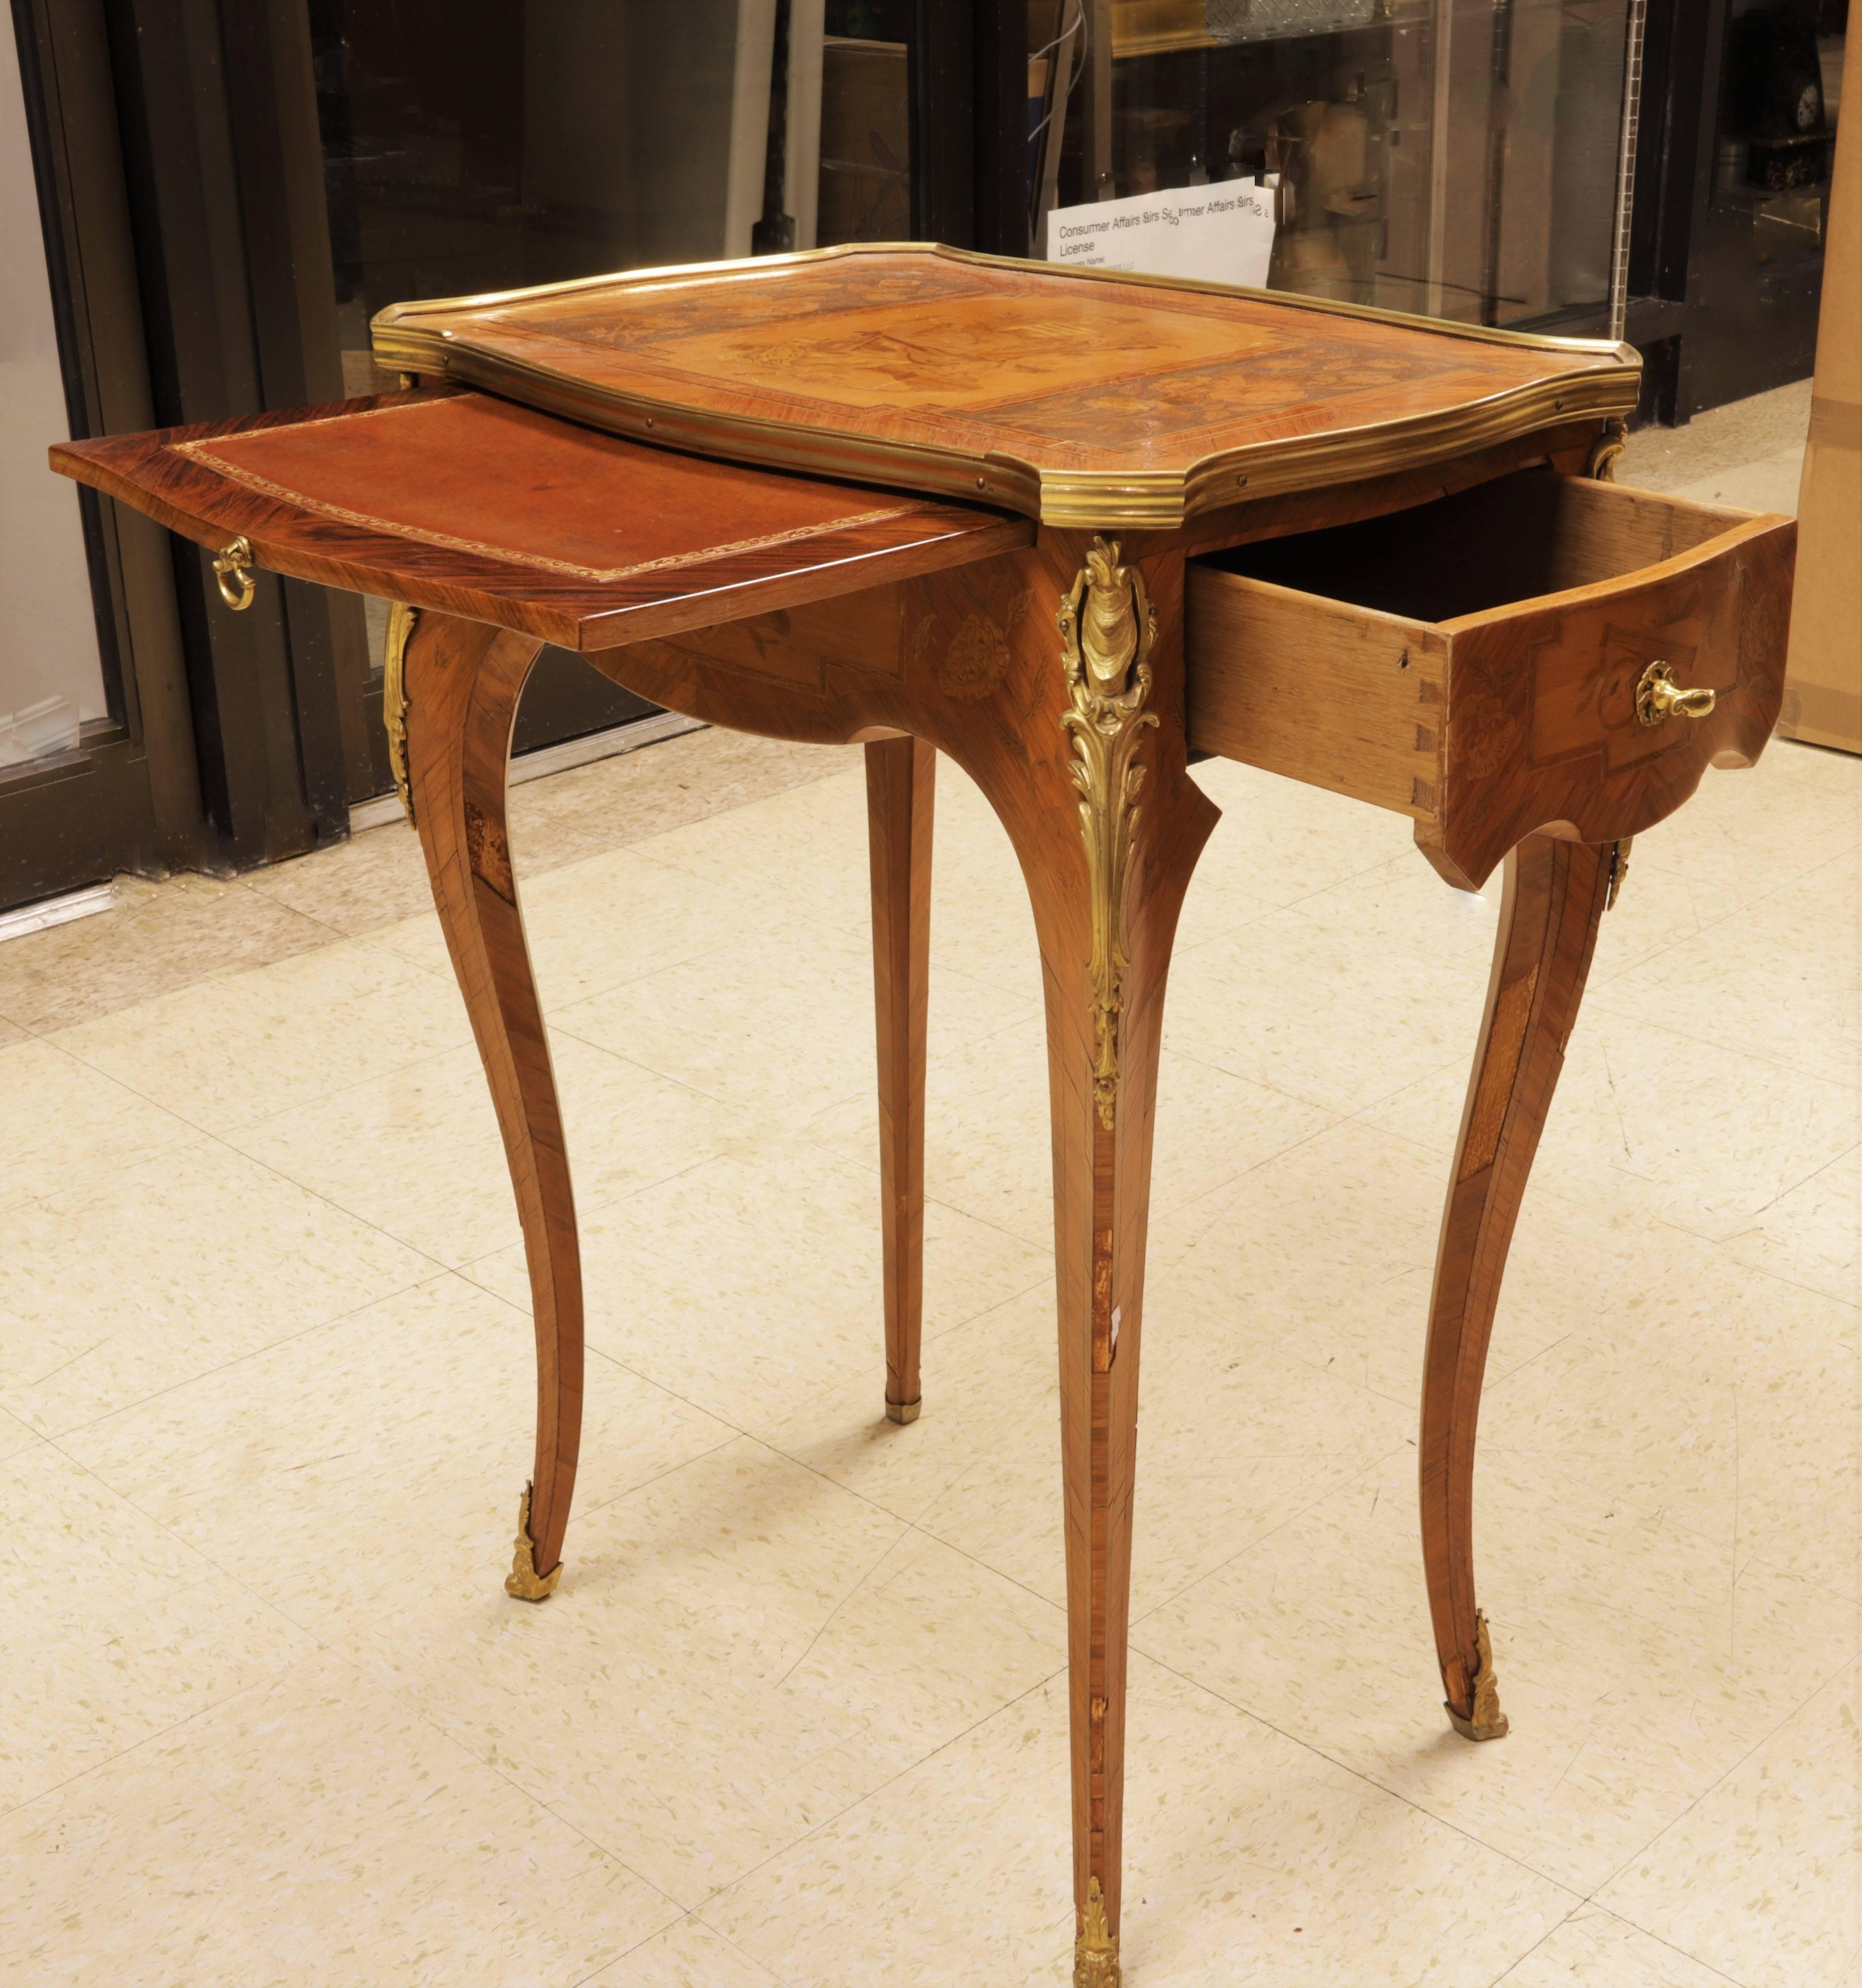 French 19th century Louis XV style marquetry inlaid side table writing desk.
Stock number: F129.